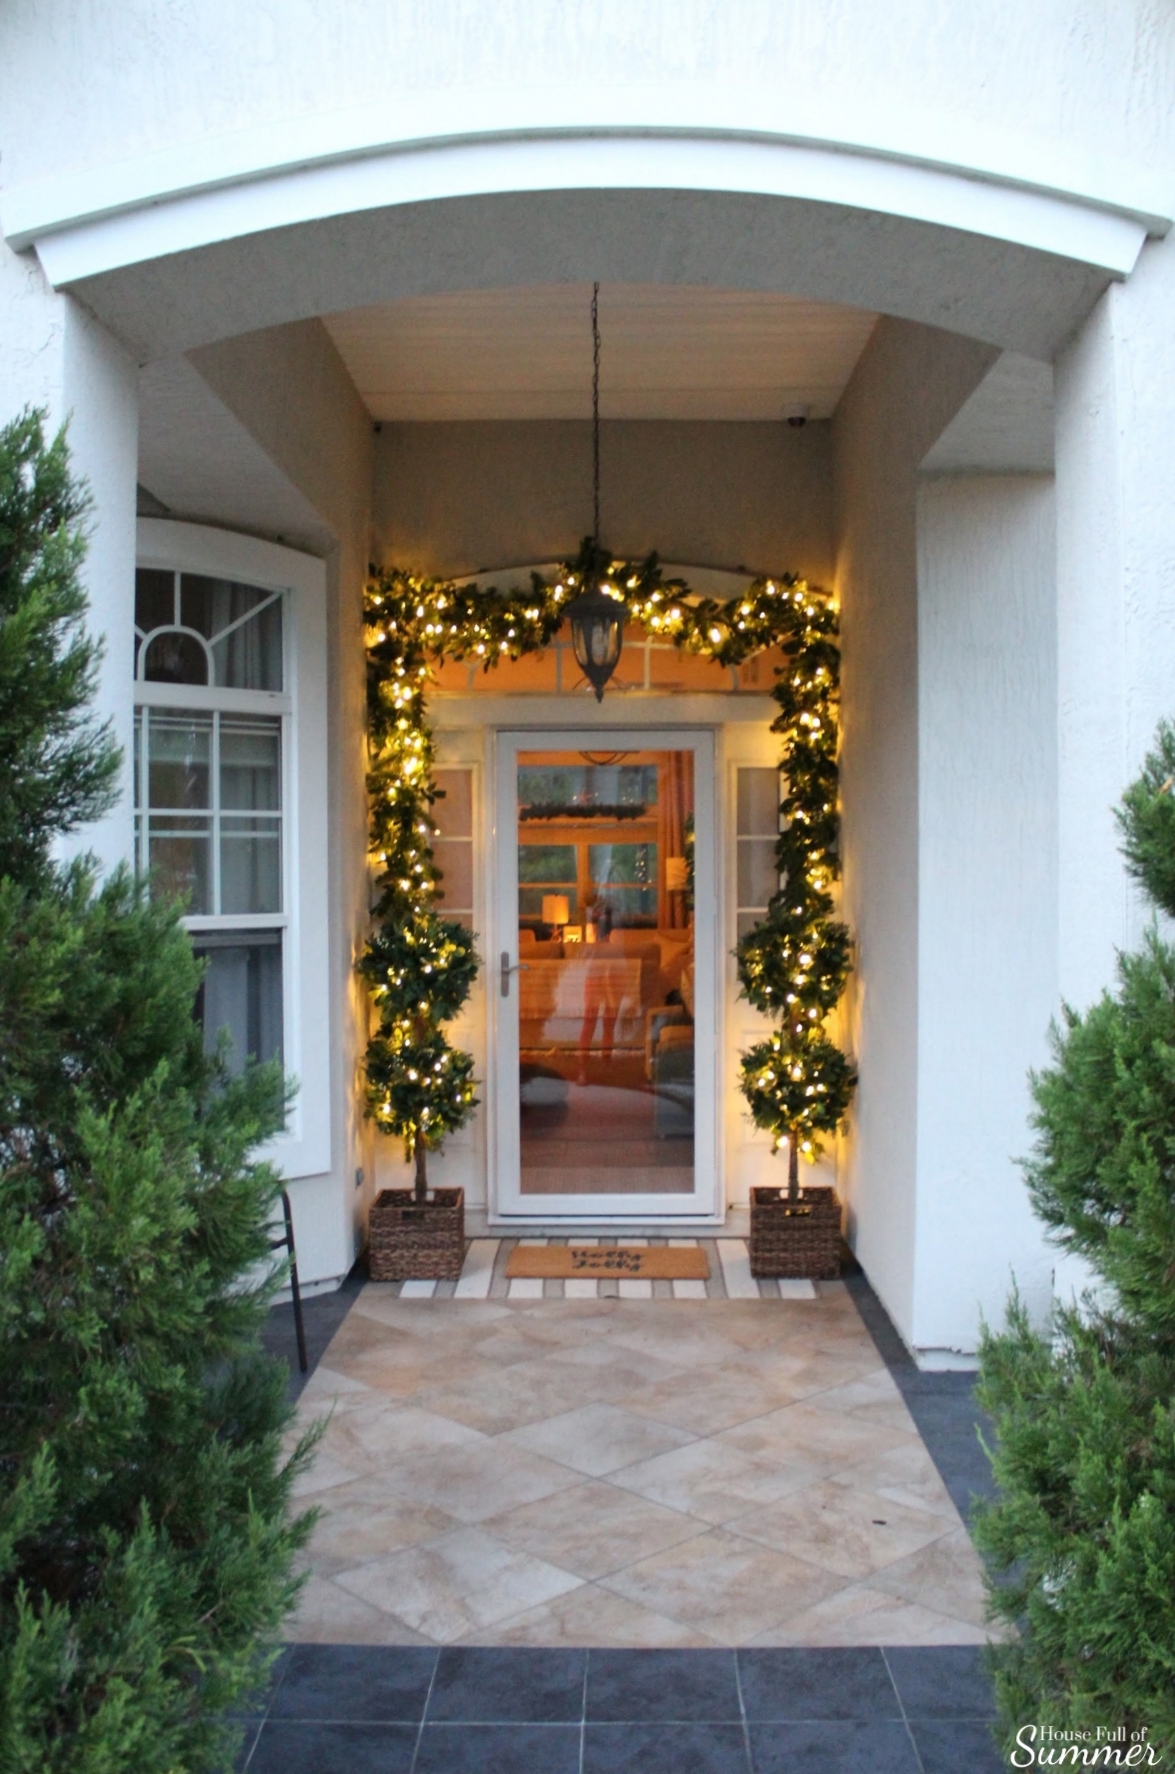 How To Decorate Your Porch For Christmas In A Warm Climate House Full Of Summer Coastal Home Lifestyle